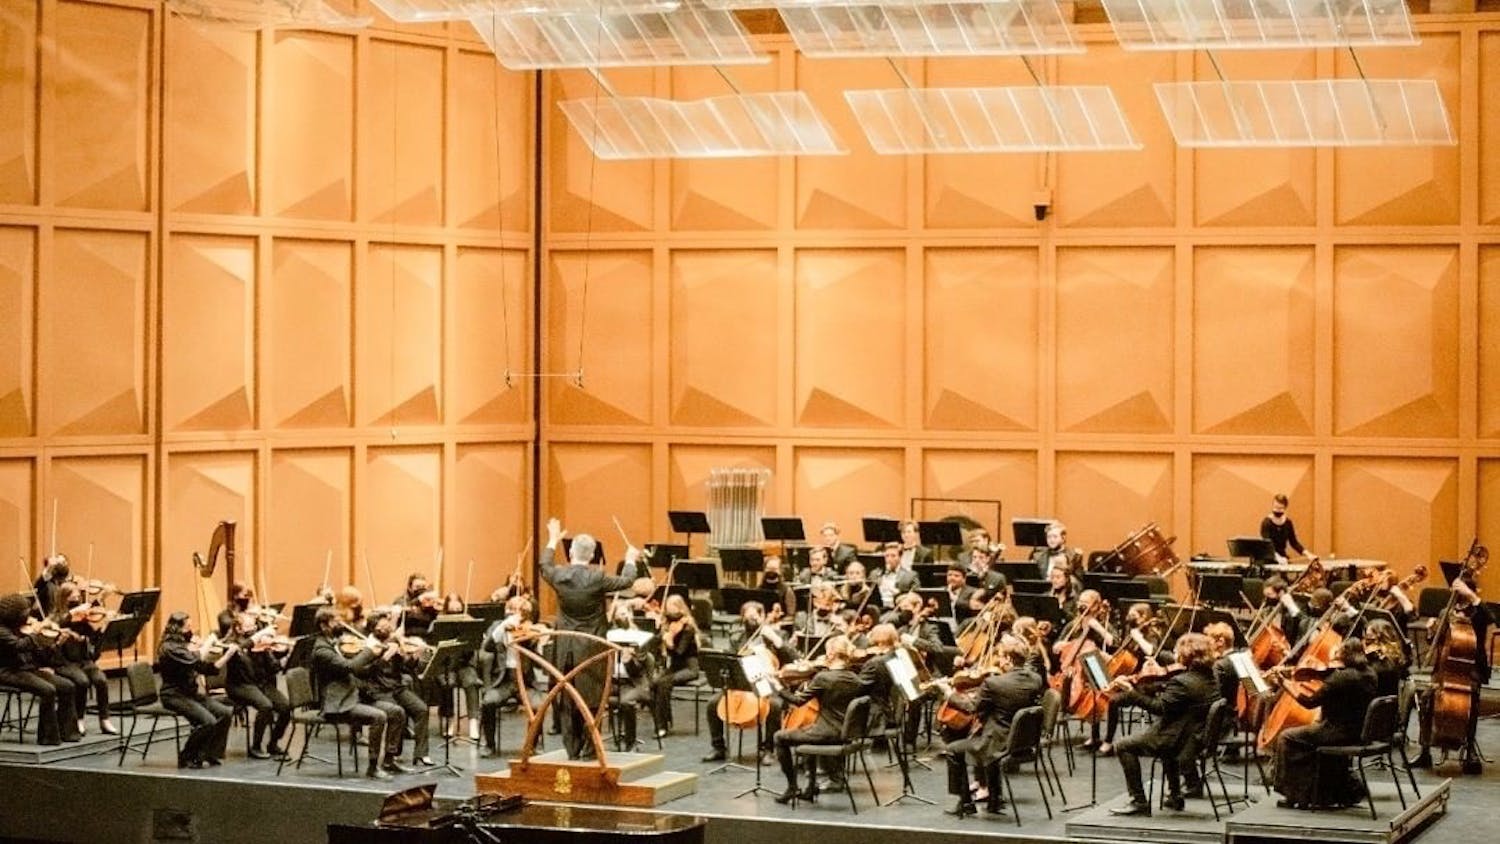 Scott Weiss conducts the USC Symphony Orchestra in a concert from a previous season. "The Planets" will premiere on Sept. 22 at 7:30 p.m. at the Koger Center.